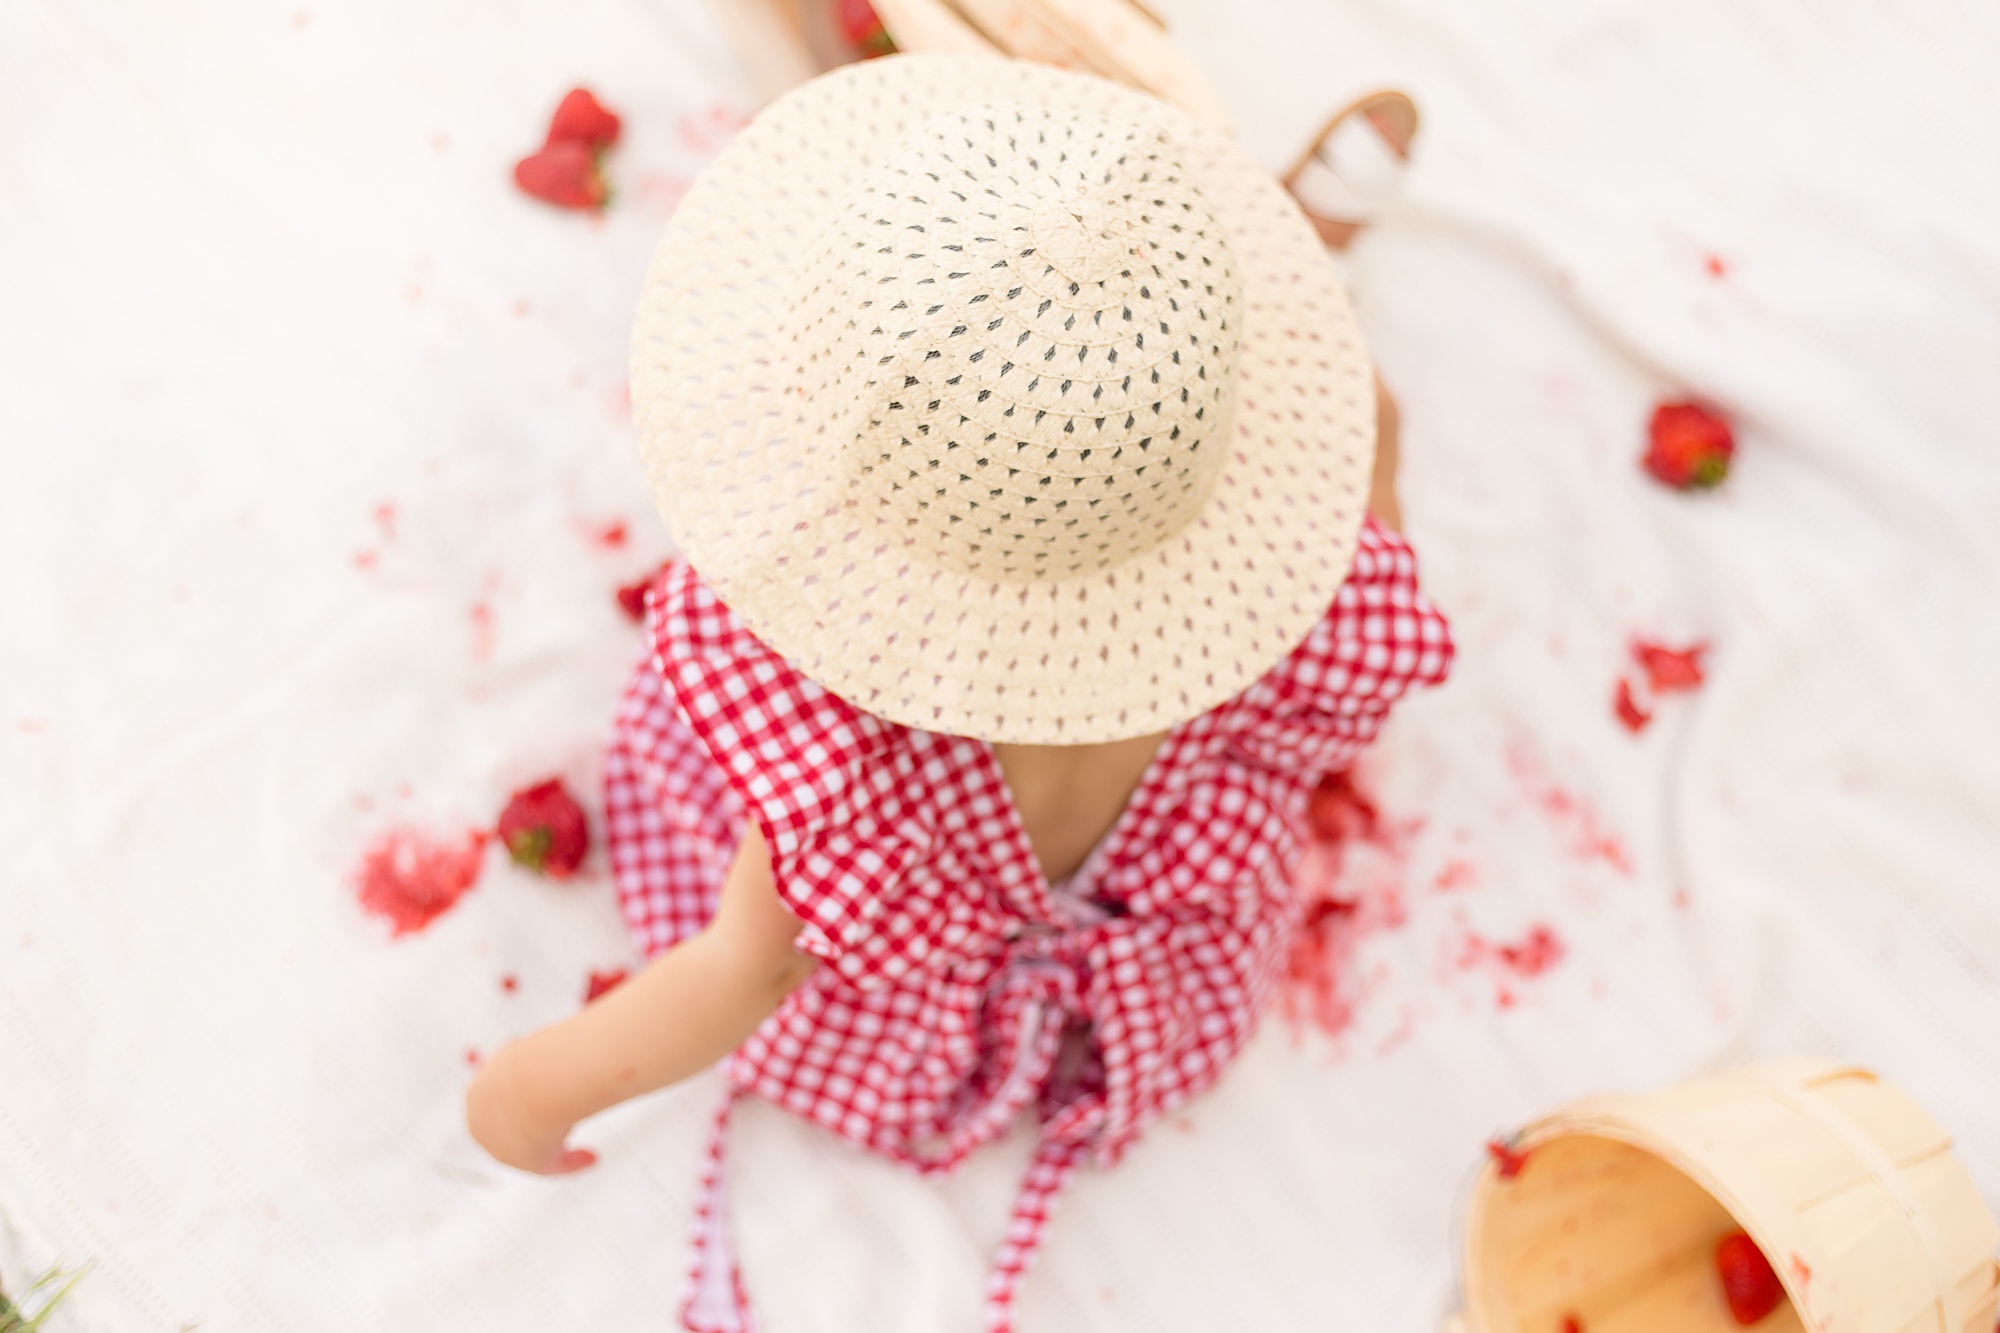 baby in straw hat plays with strawberries